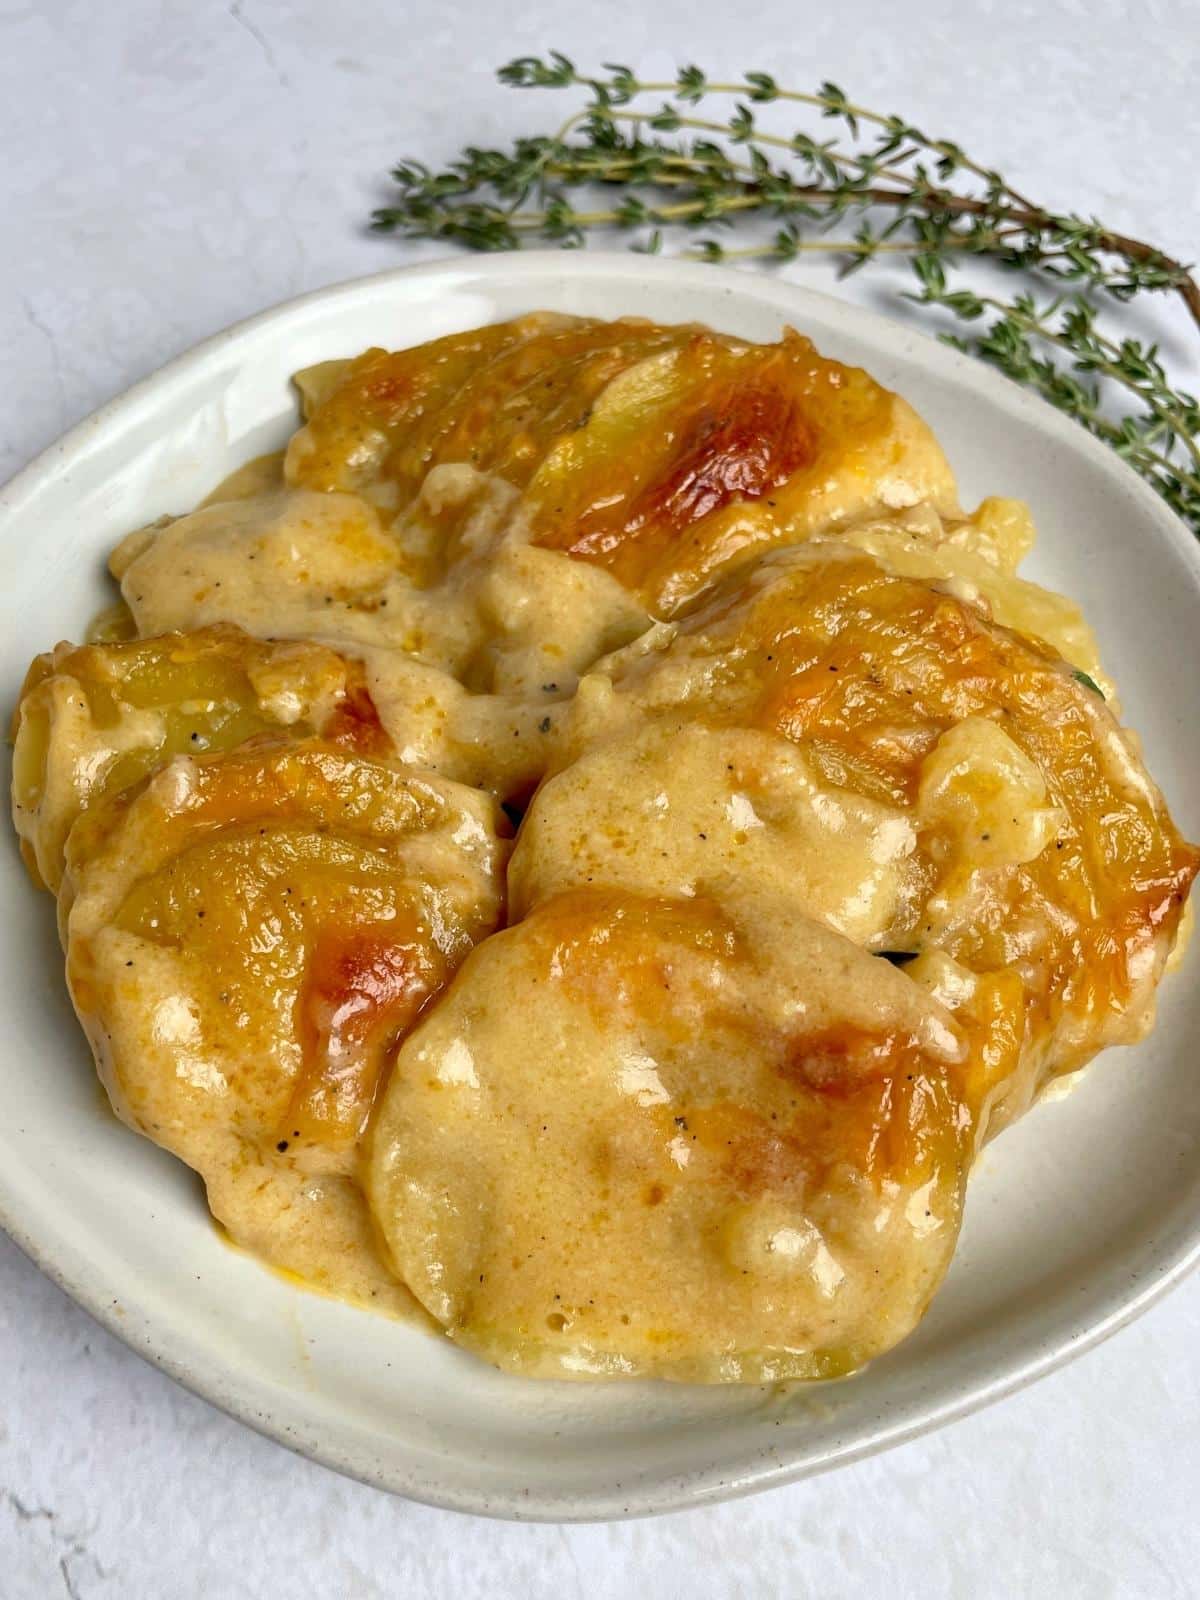 One serving of scalloped potatoes.